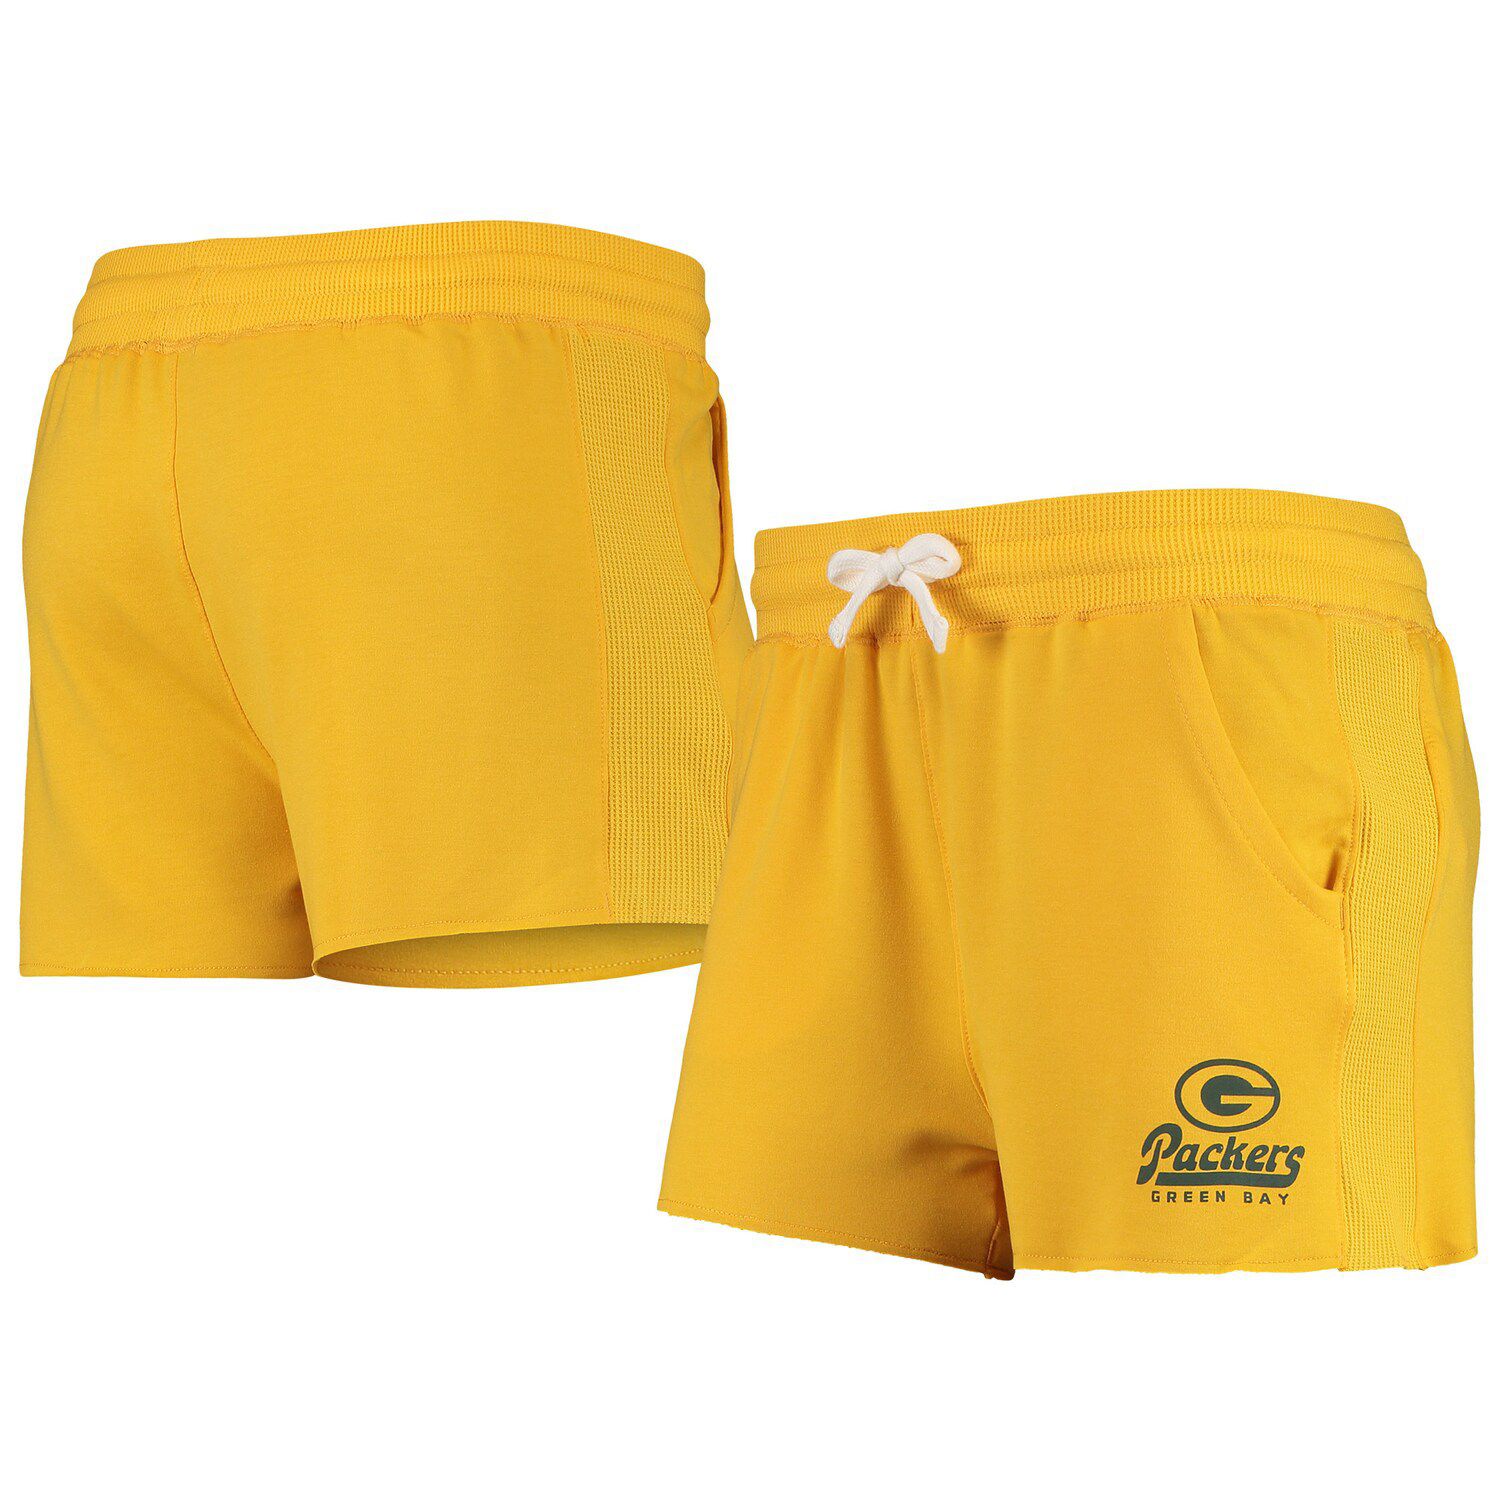 Image for Unbranded Women's Junk Food Gold Green Bay Packers Tri-Blend Shorts at Kohl's.